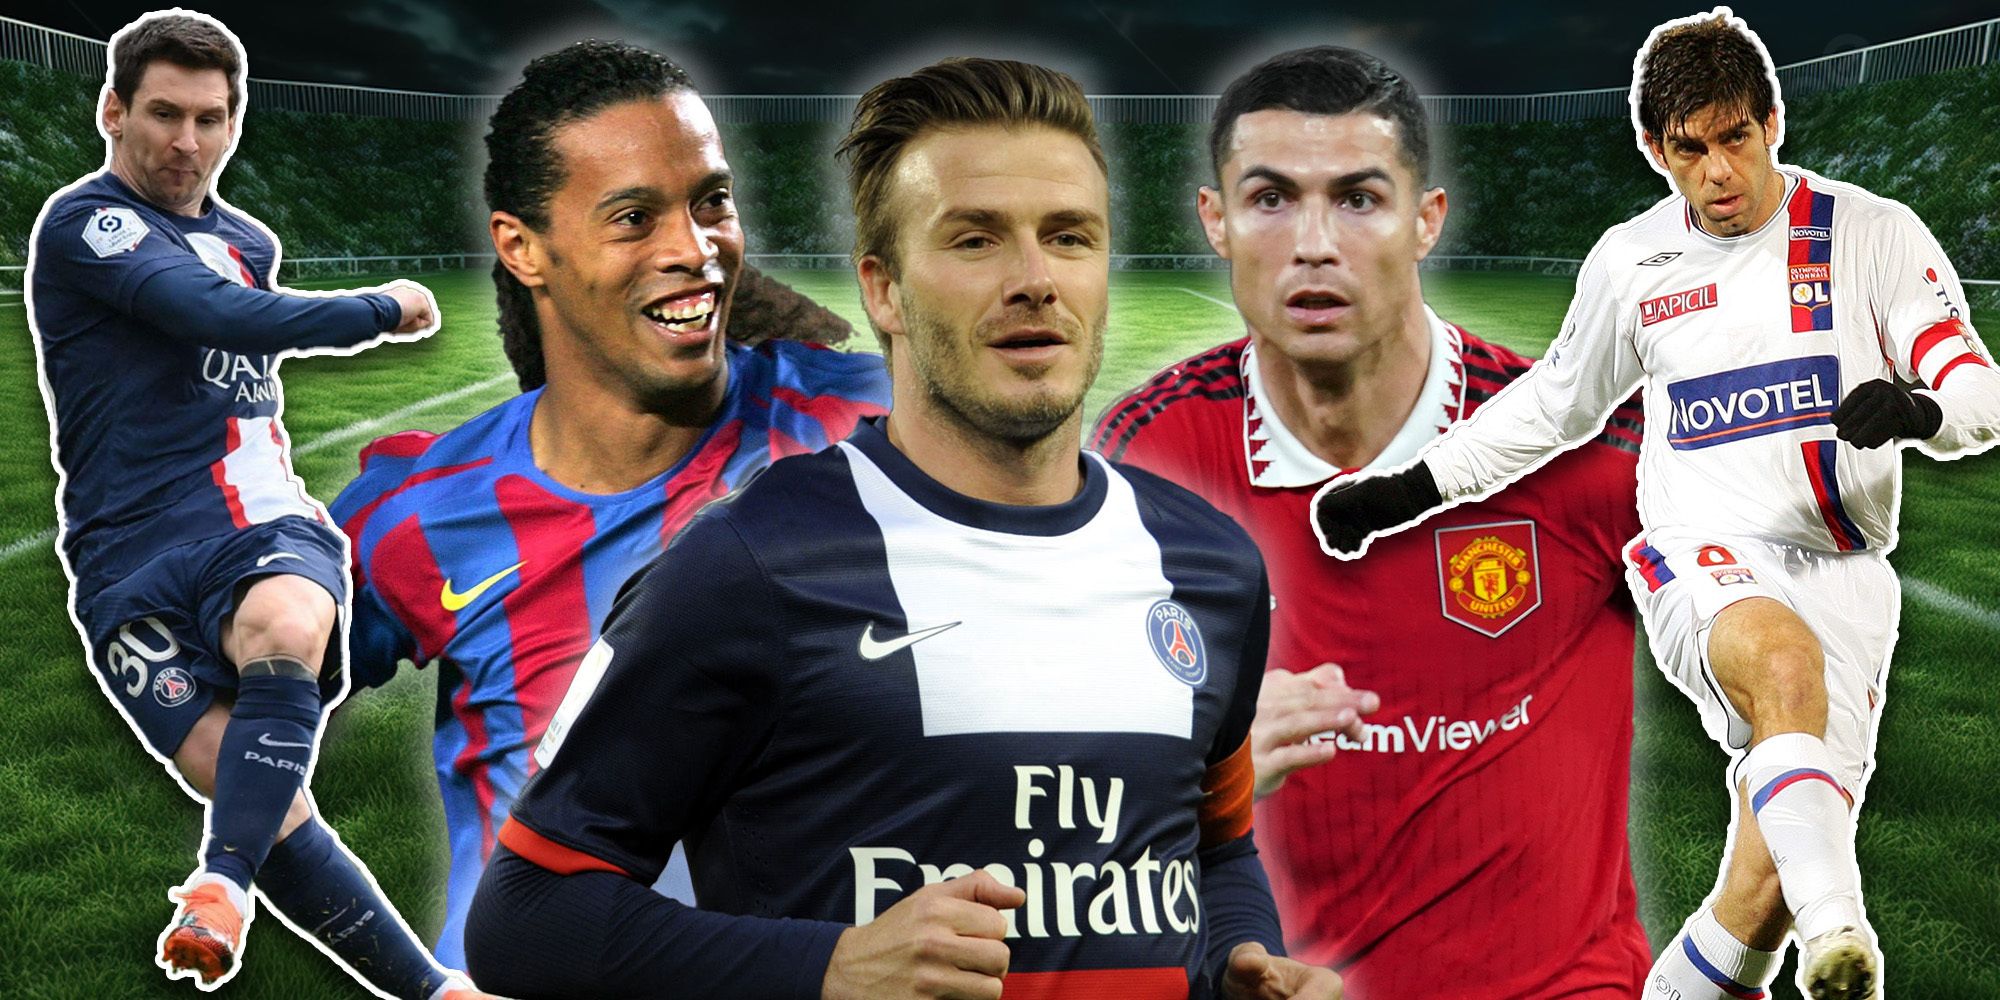 The Top 10 Players With Most Free Kick Goals Of All Time